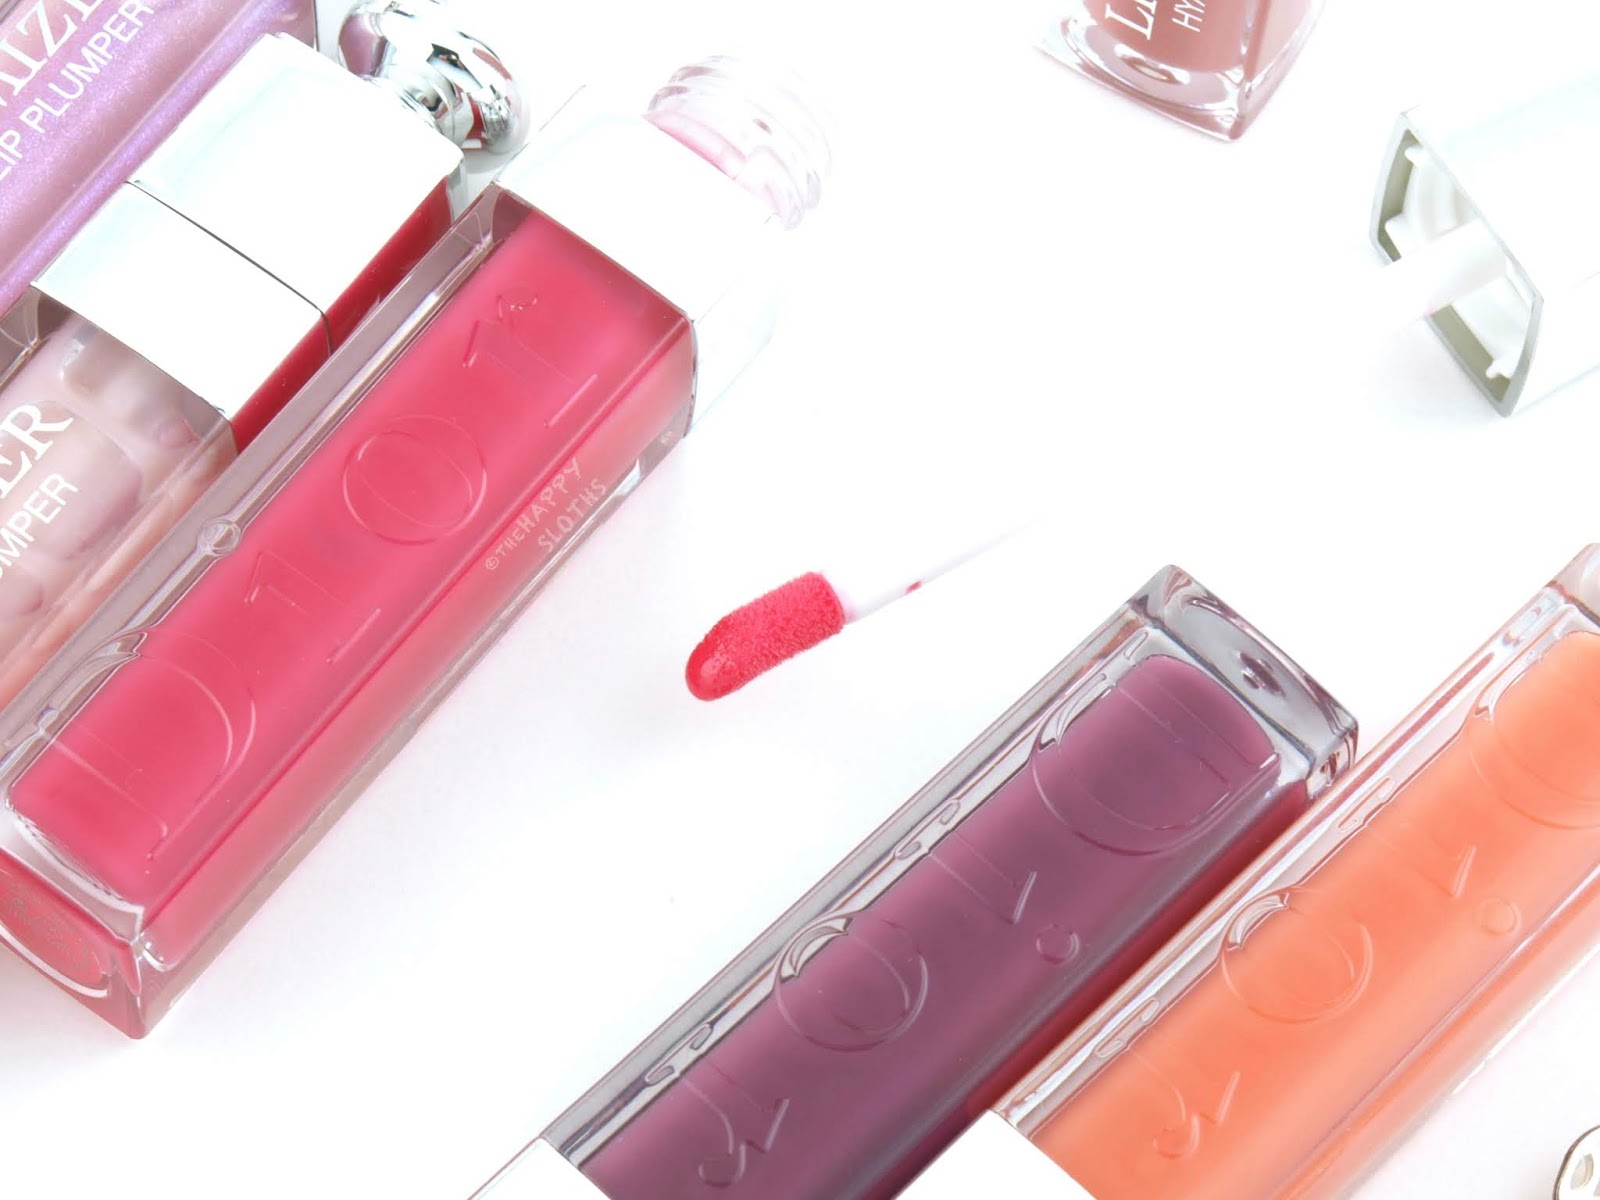 NEW DIOR LIP MAXIMIZERS  All 4 Finishes  Detailed Review  Arm  Lip  Swatches  YouTube